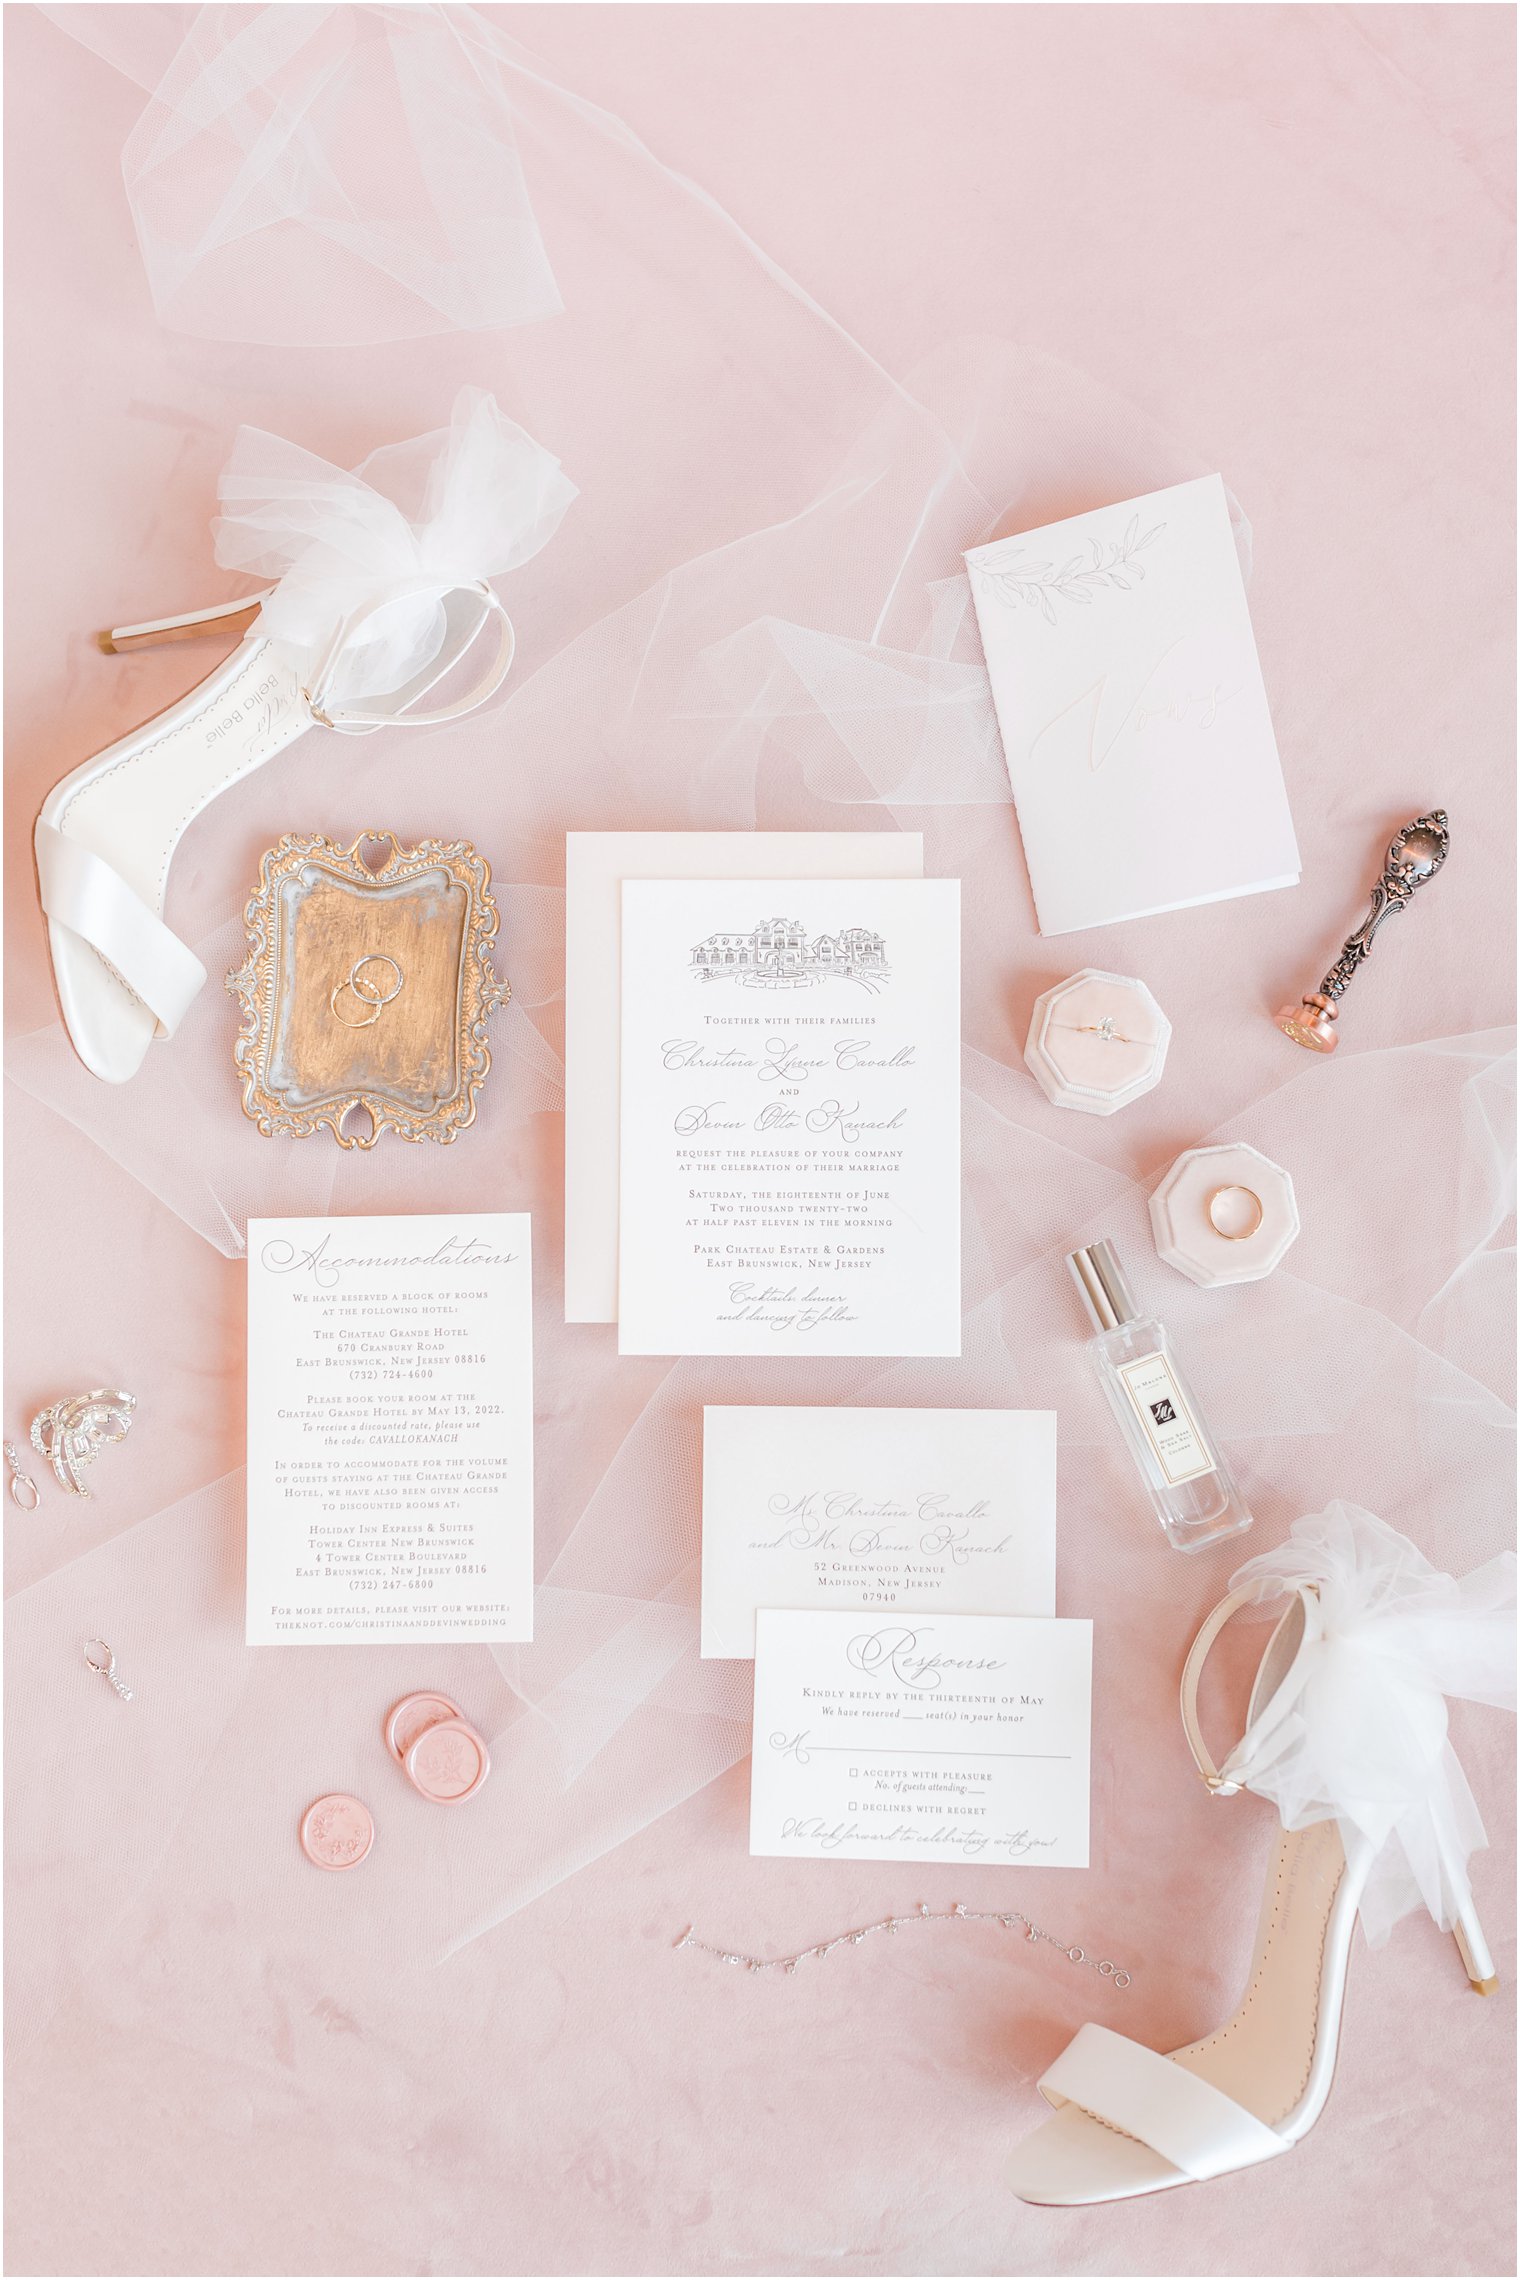 classic invitation suite for summer wedding day at Park Chateau Estate